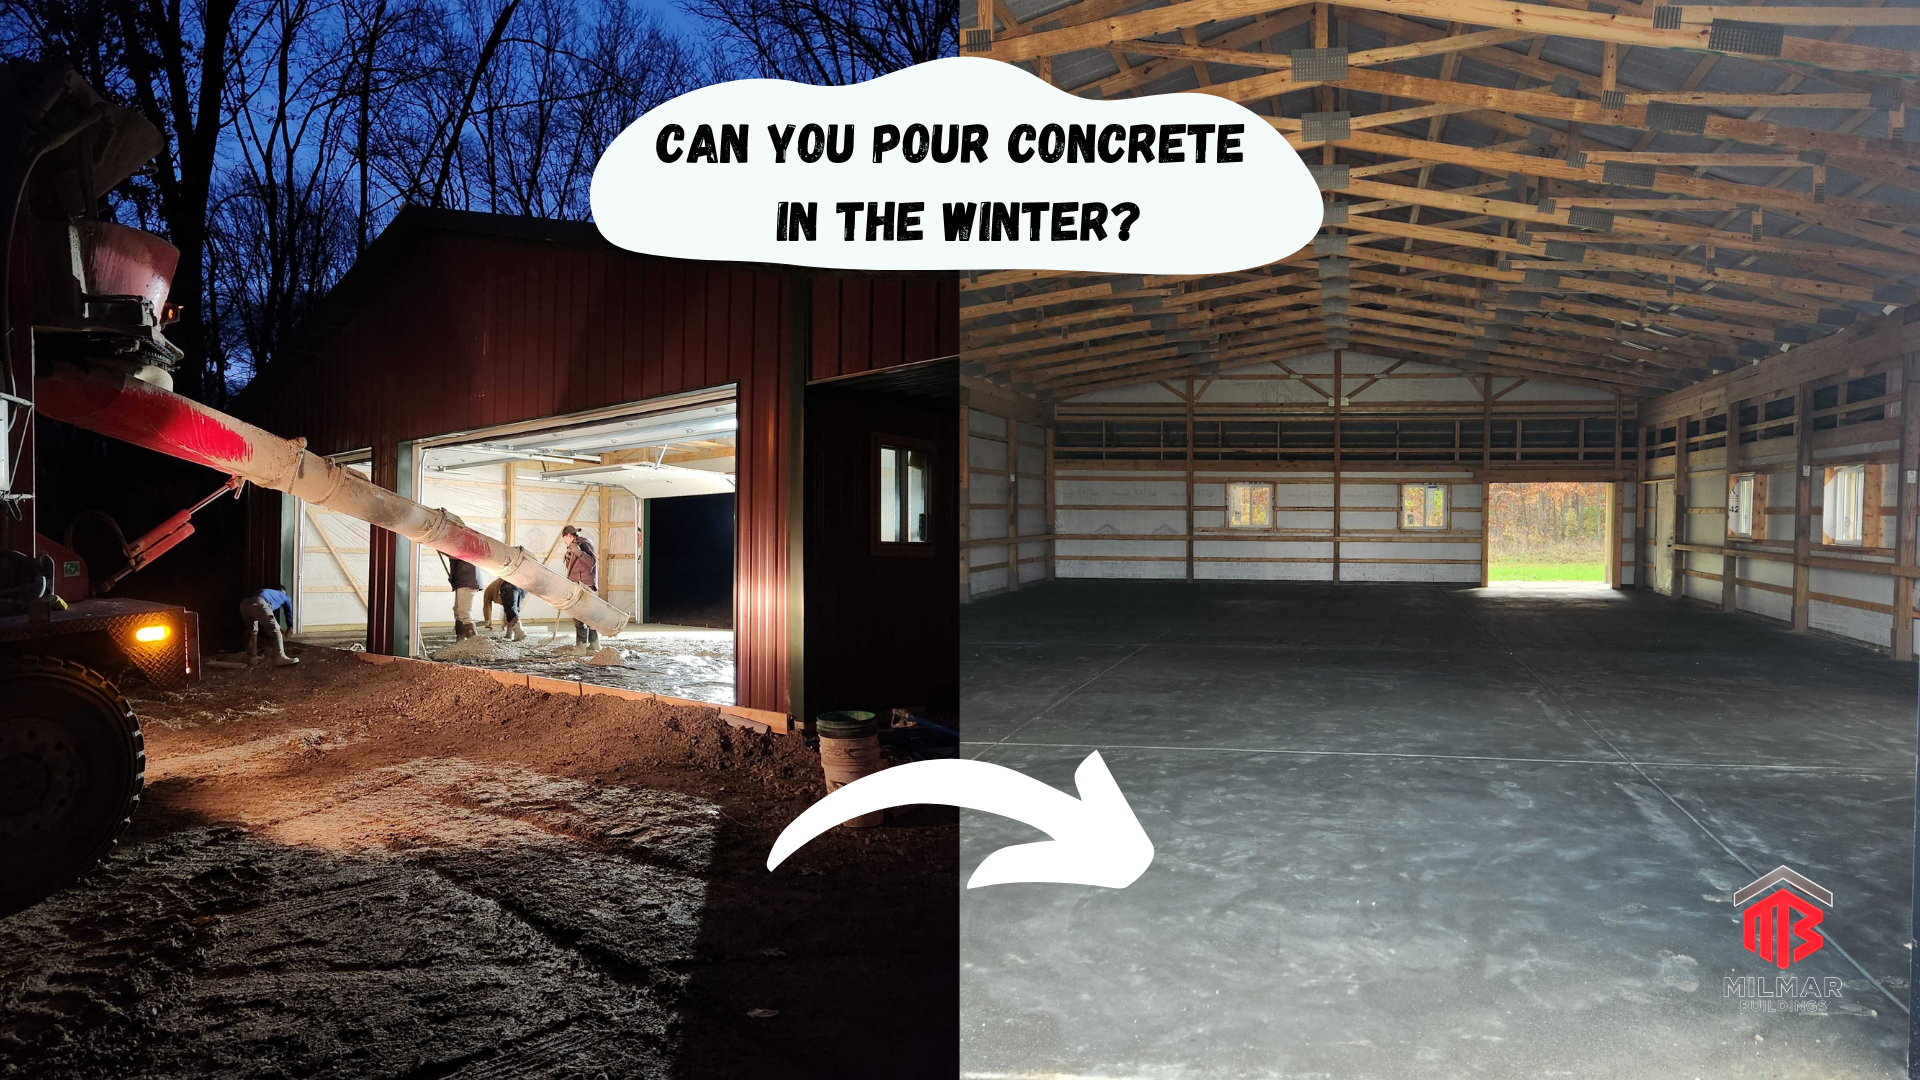 Can you pour concrete in the winter? - Image